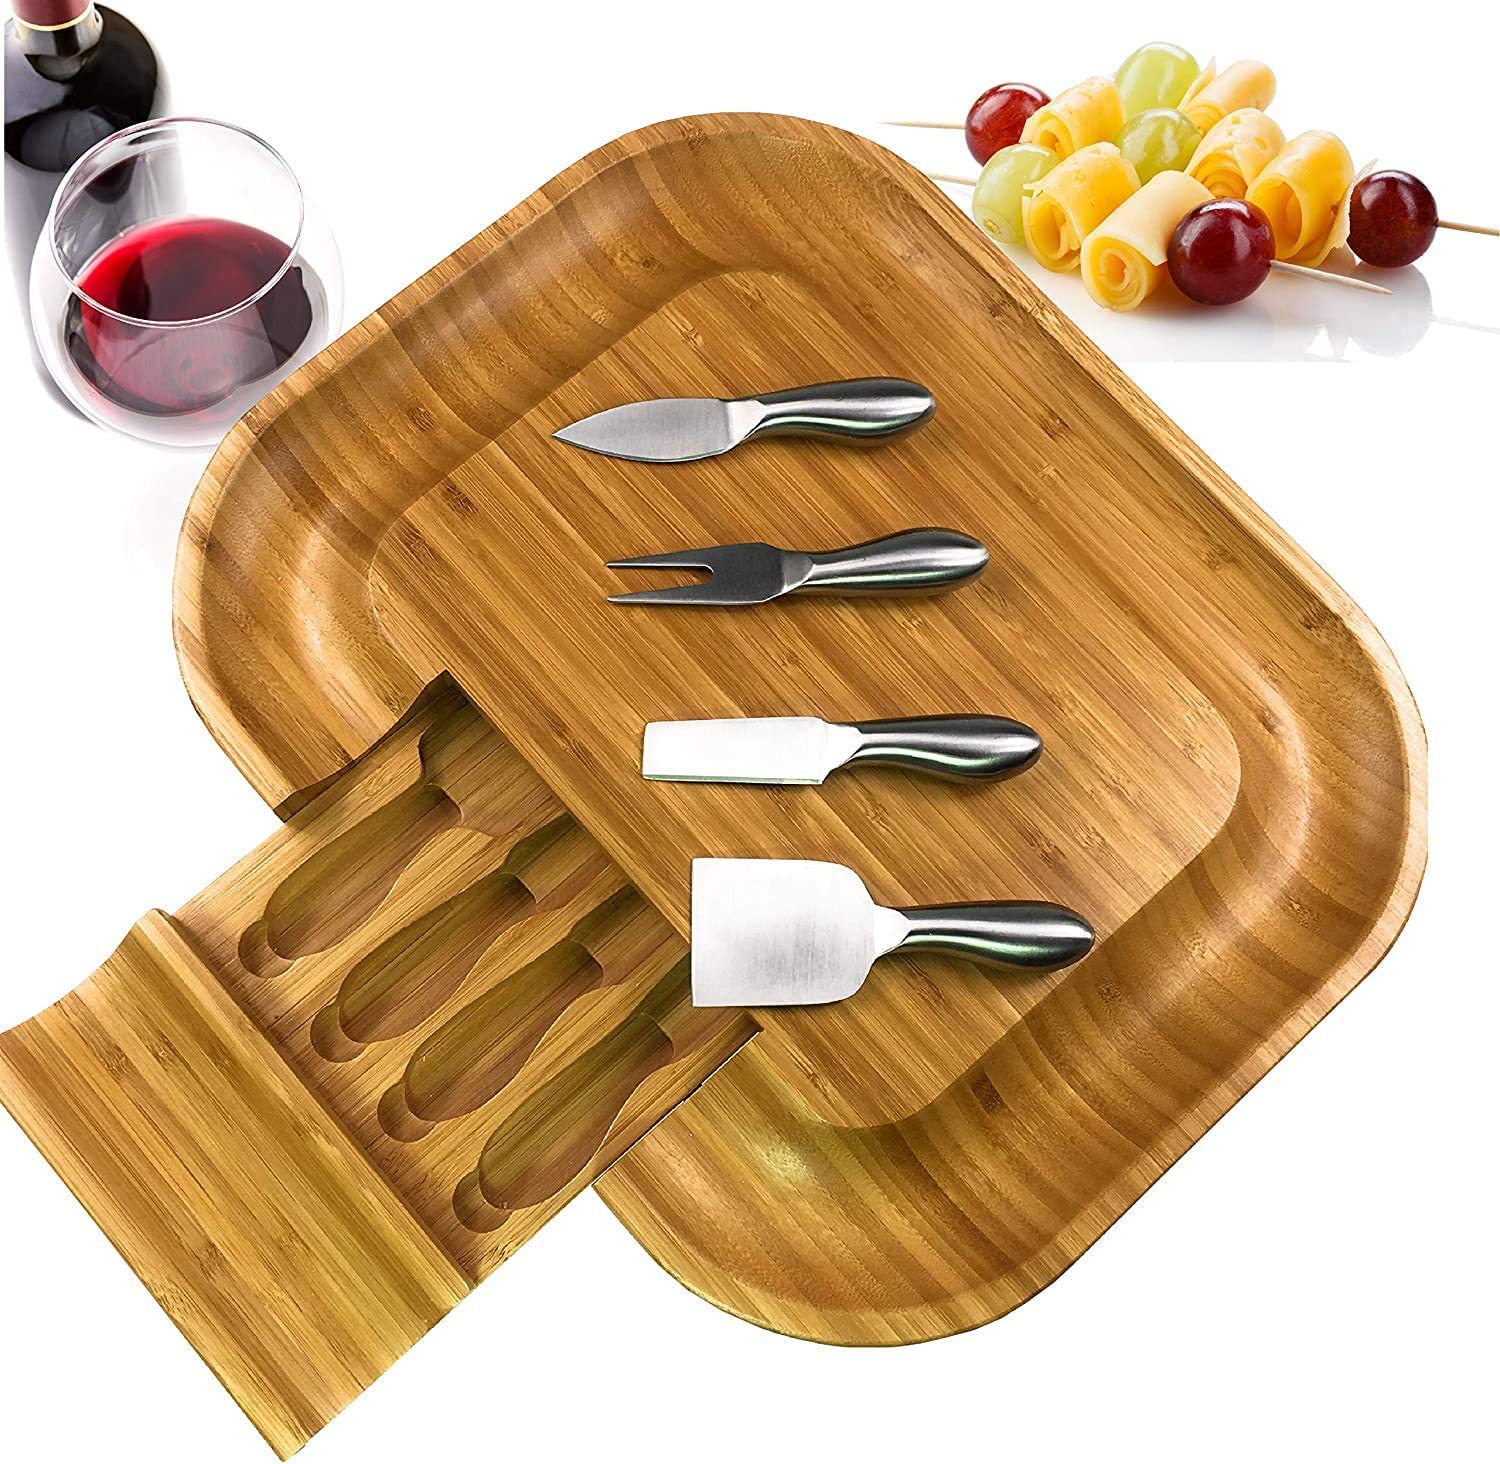 Solander Skelf Large Cheese Board and Knife Set - Stylish Charcuterie Board Set, Bamboo Housewarming Gifts New Home, Birthday Gifts for Women, or Wedding Gifts for Couples